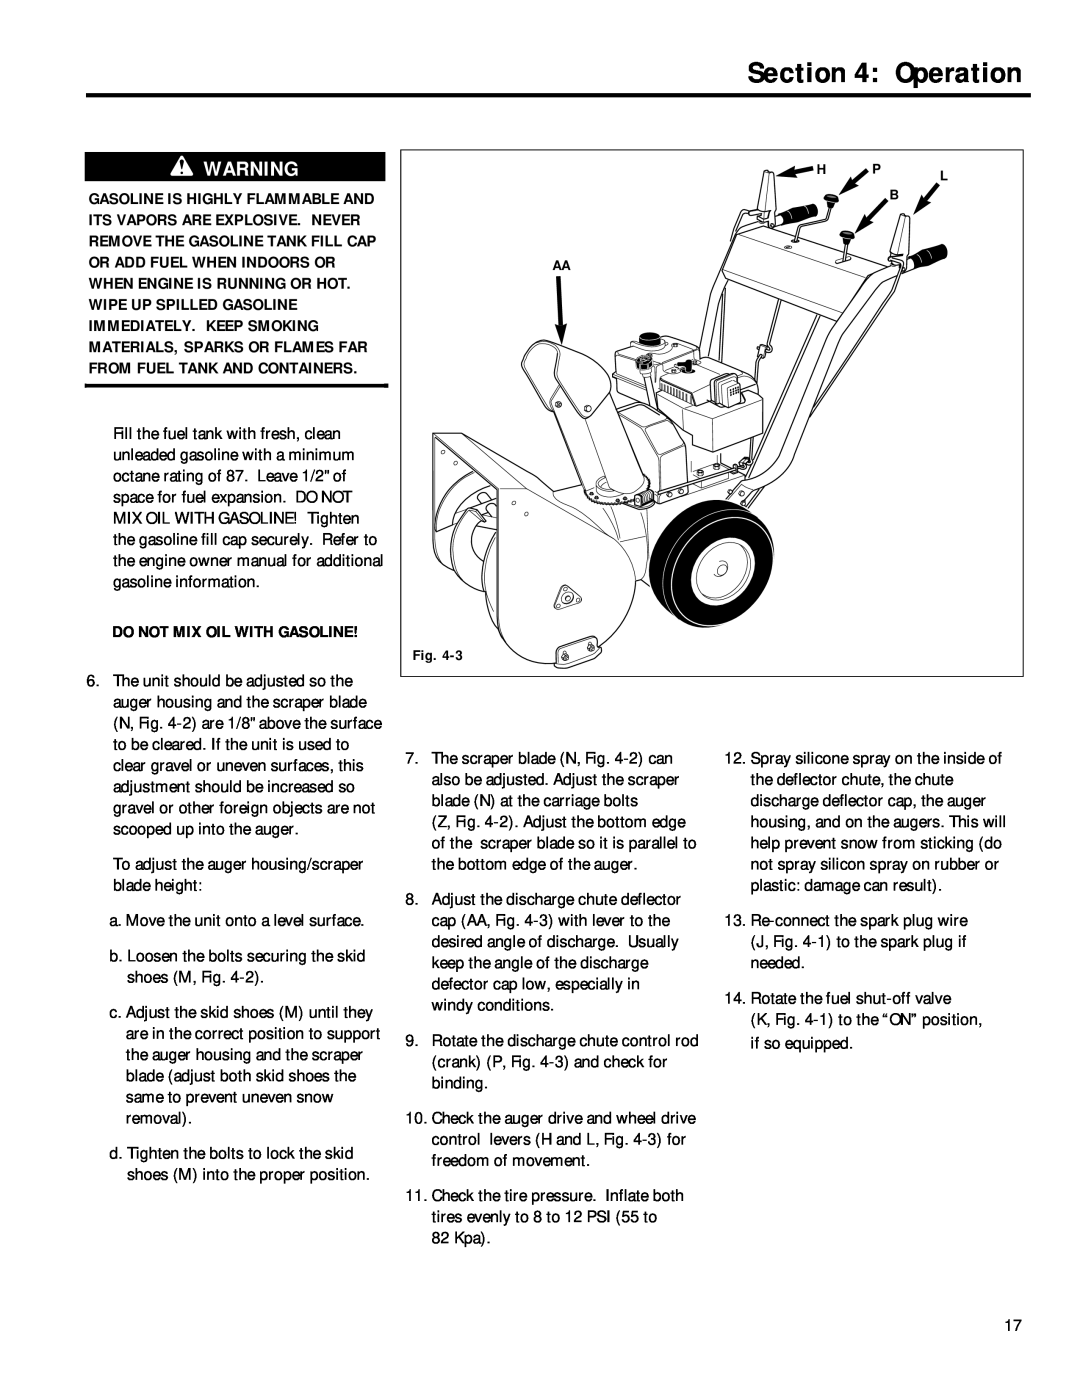 Troy-Bilt 42012, 42031, 42010, 42030 manual Operation, Do Not Mix Oil With Gasoline 